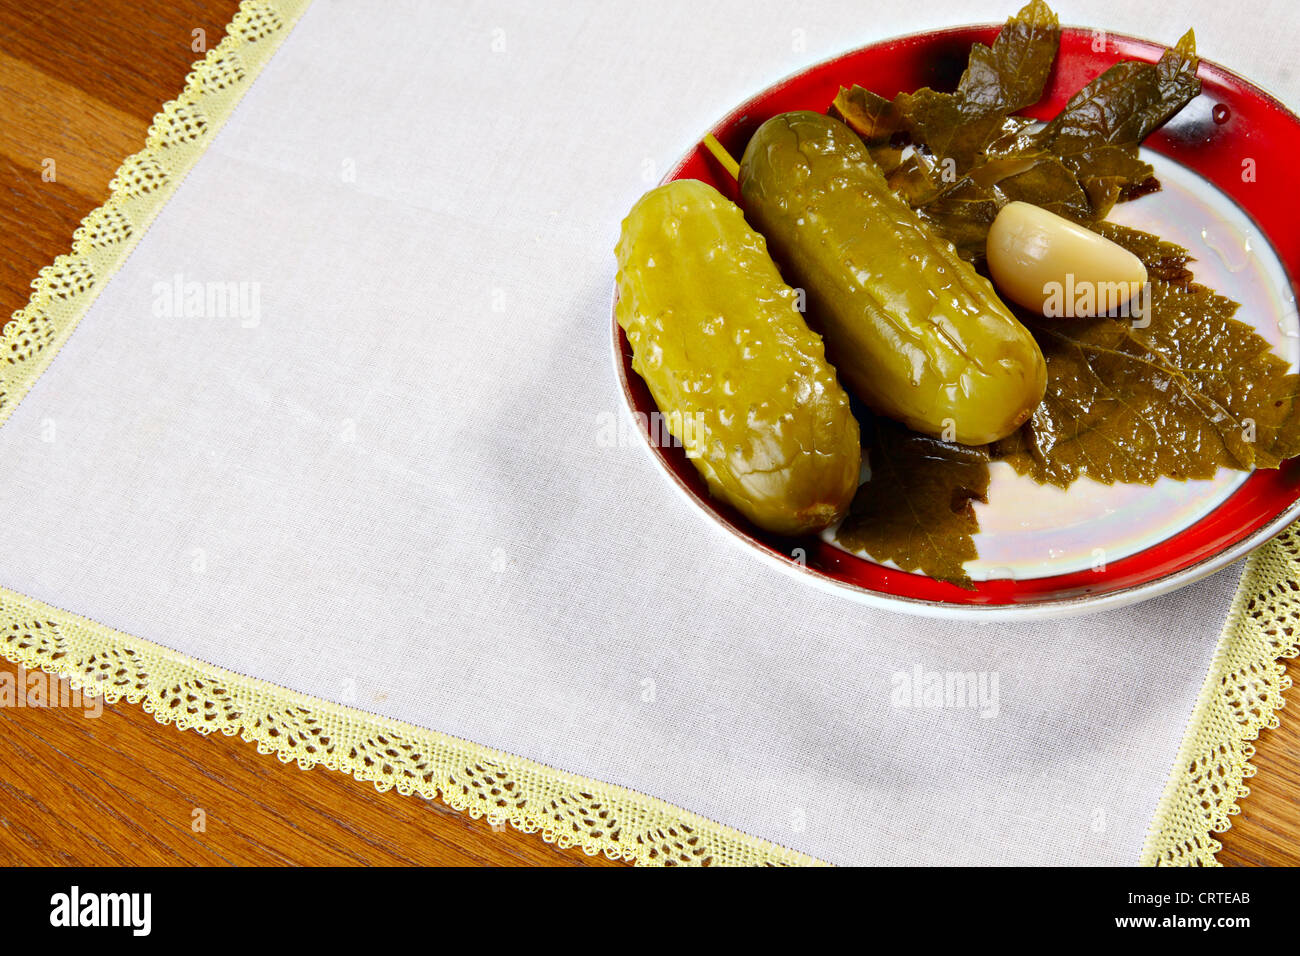 Marinated cucumbers on plate with garlic and currant leaf Stock Photo